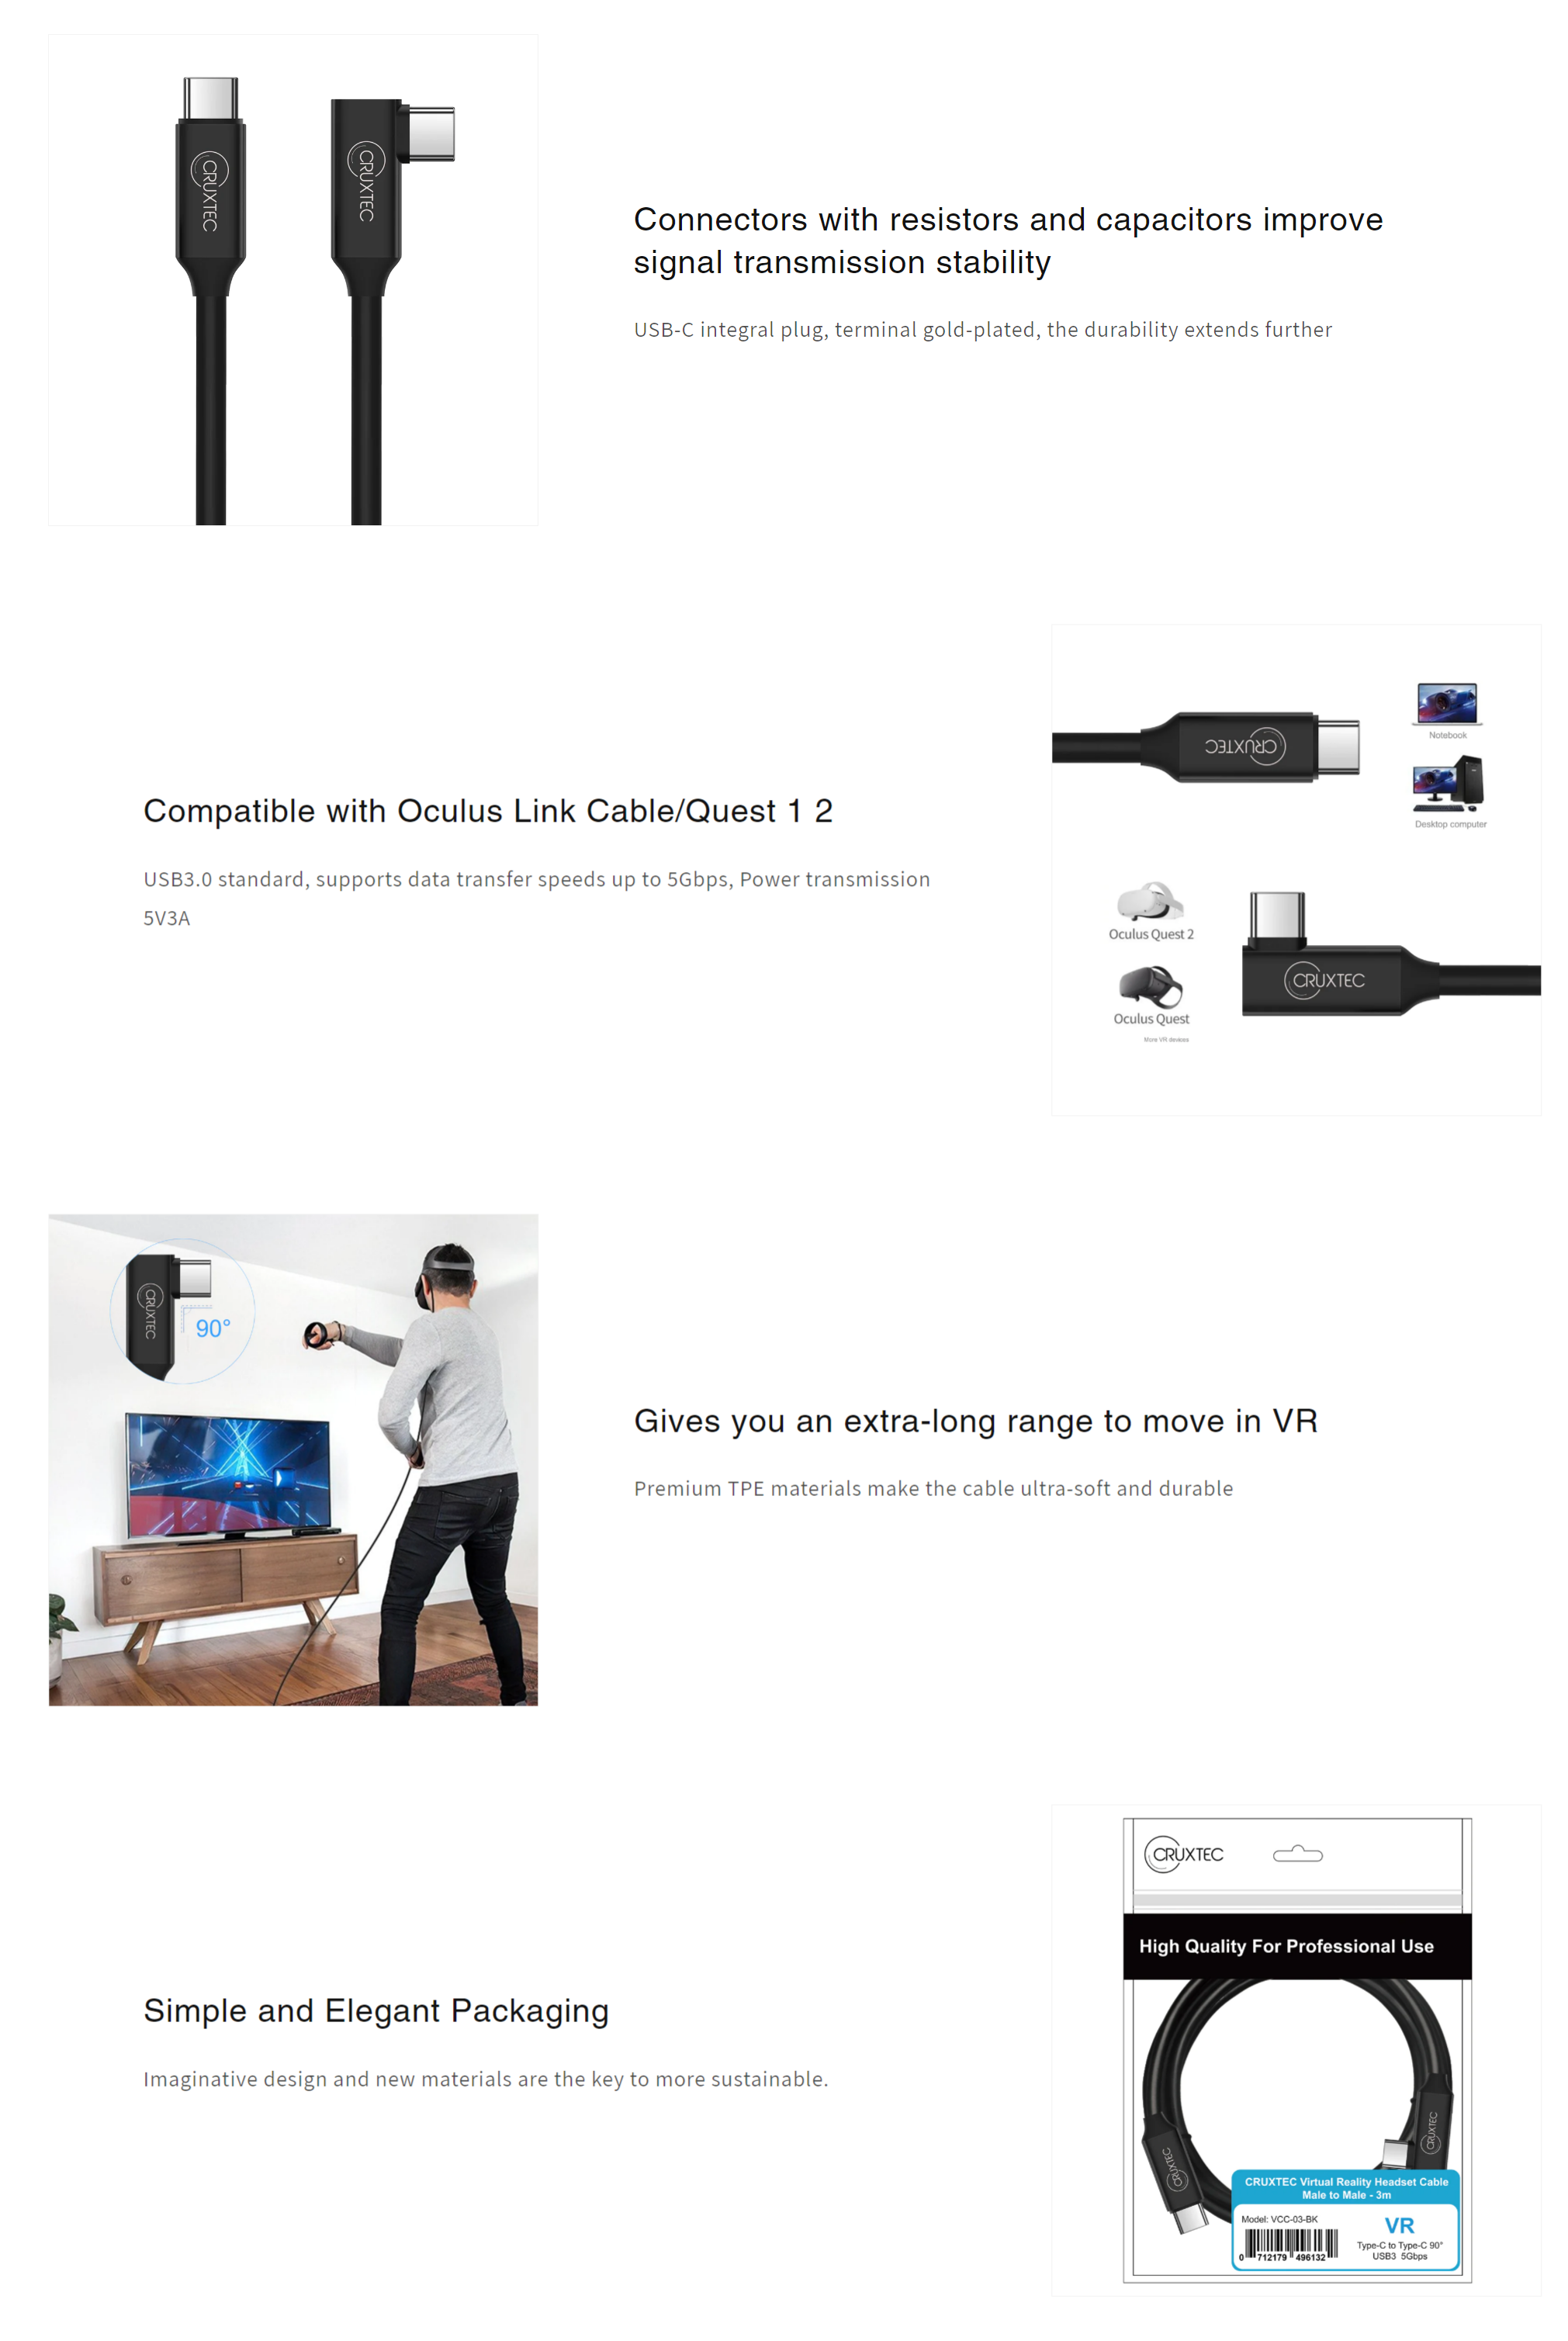 A large marketing image providing additional information about the product Cruxtec USB-C to USB-C 90 Degree Angle VR Cable - 5m - Additional alt info not provided